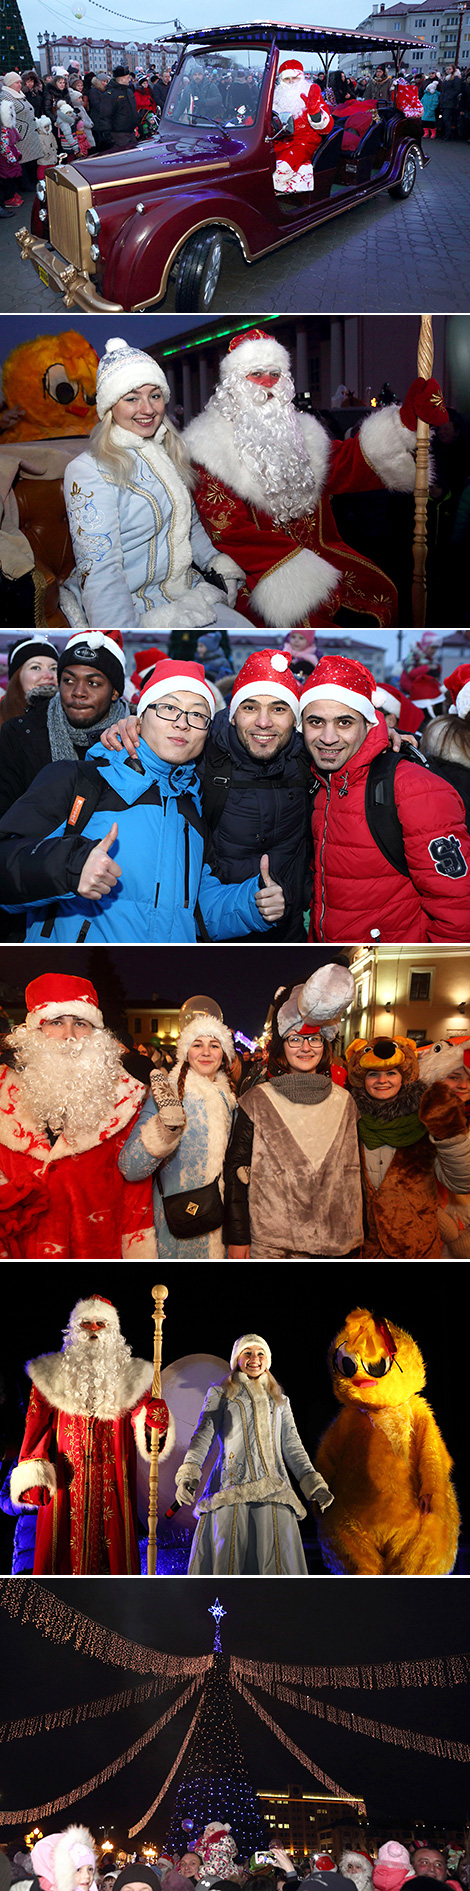 Father Frost and Snow Maiden Parade in Grodno 